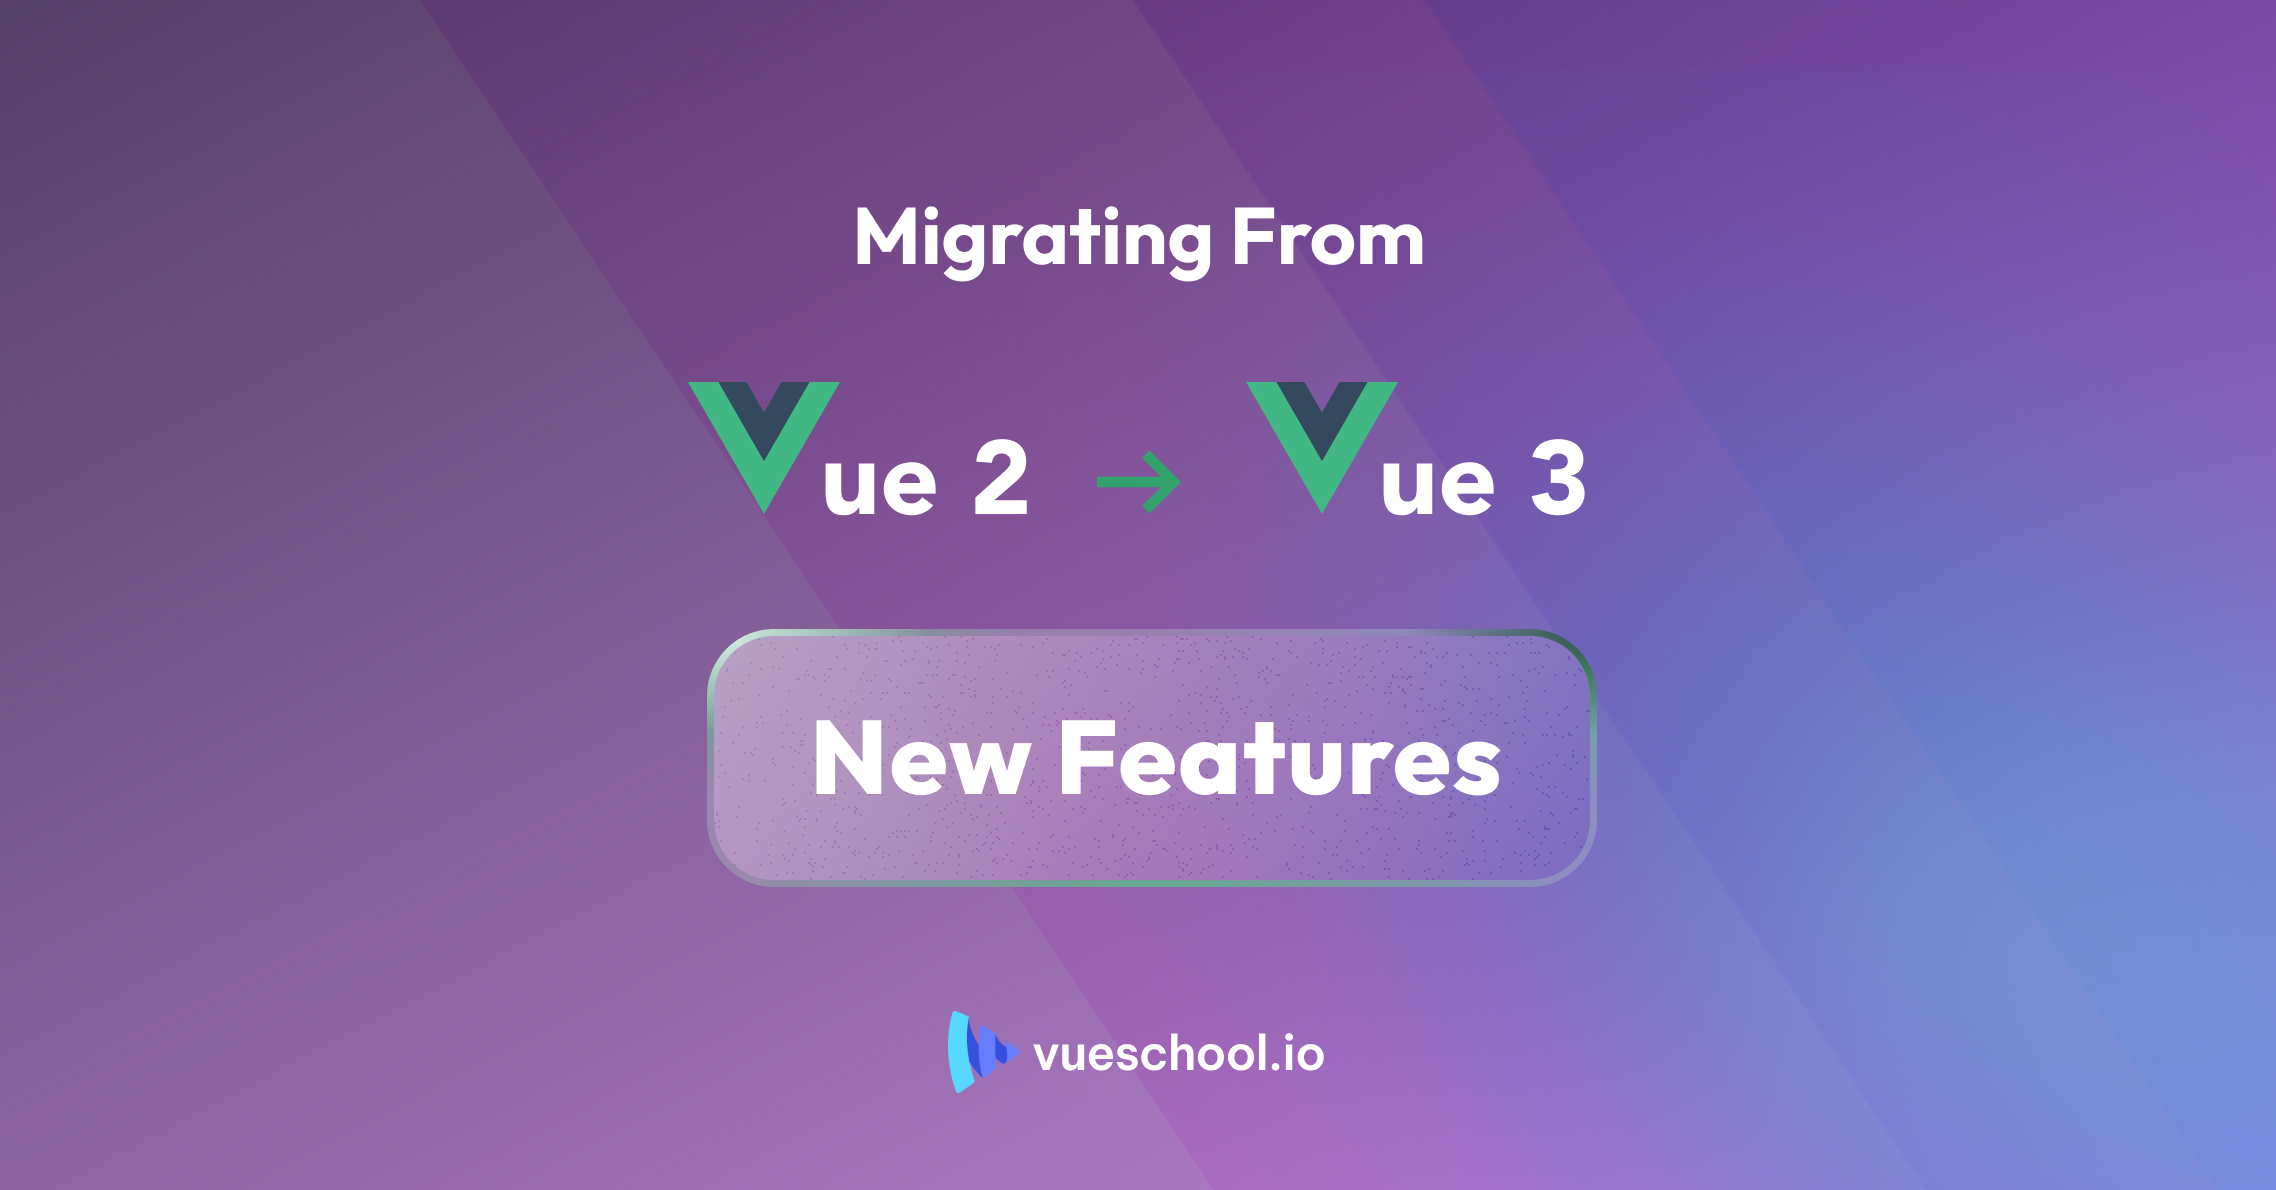 Migrating from Vue 2 To Vue 3 &#8211; New Features